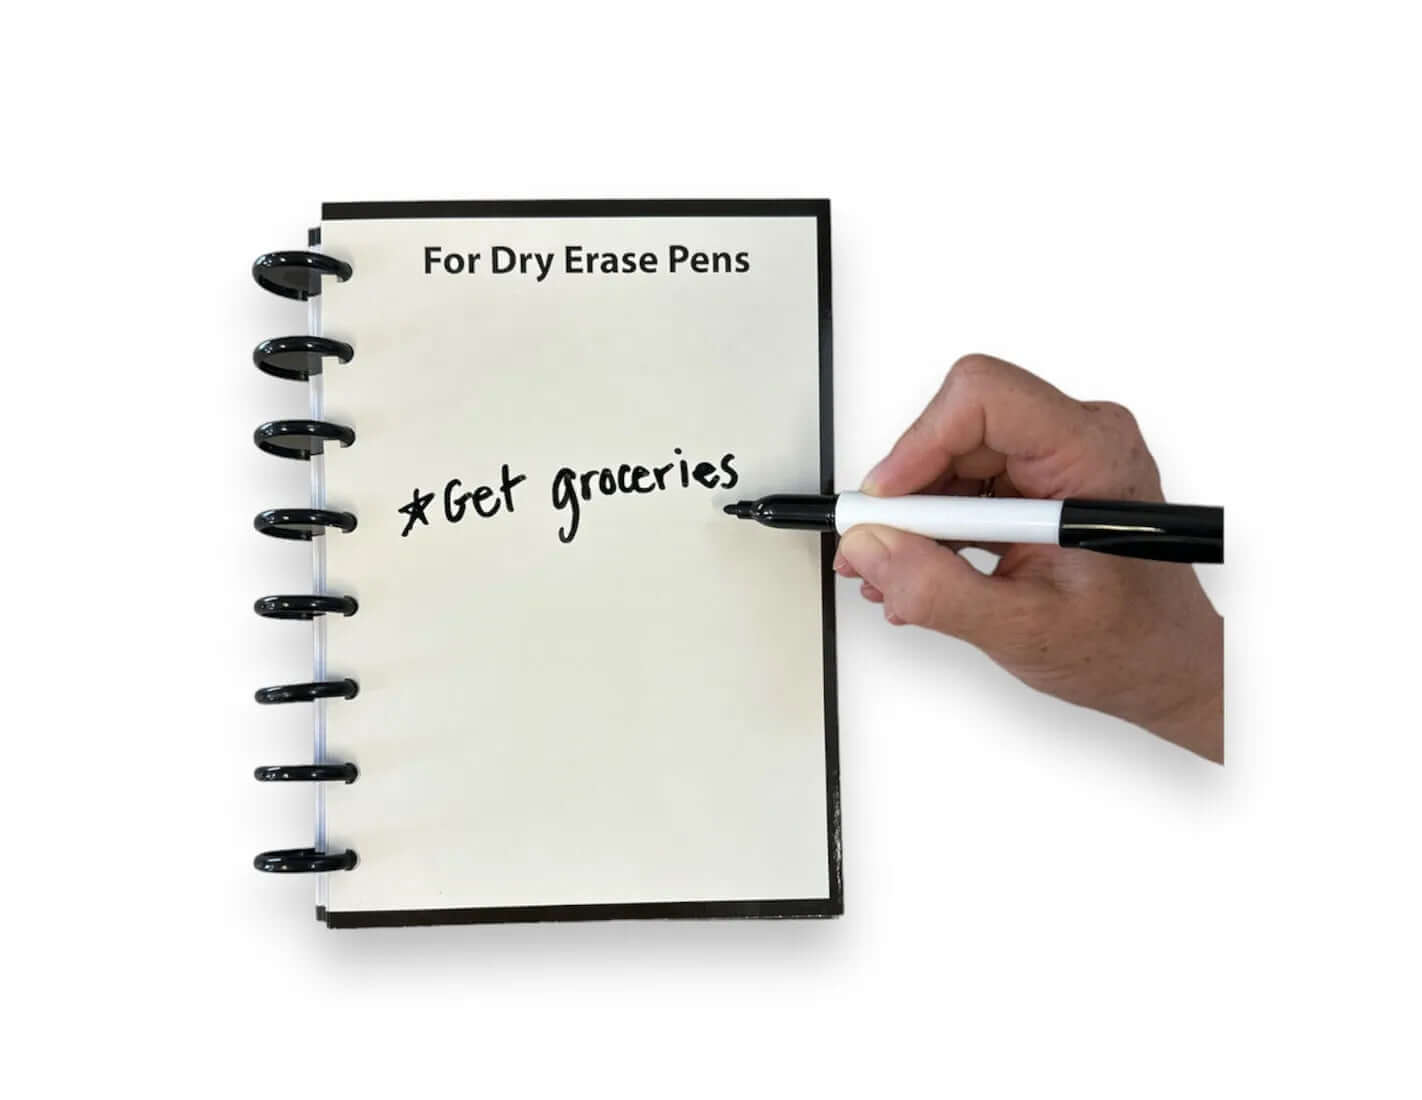 The page of the book that has built-in dry erase features